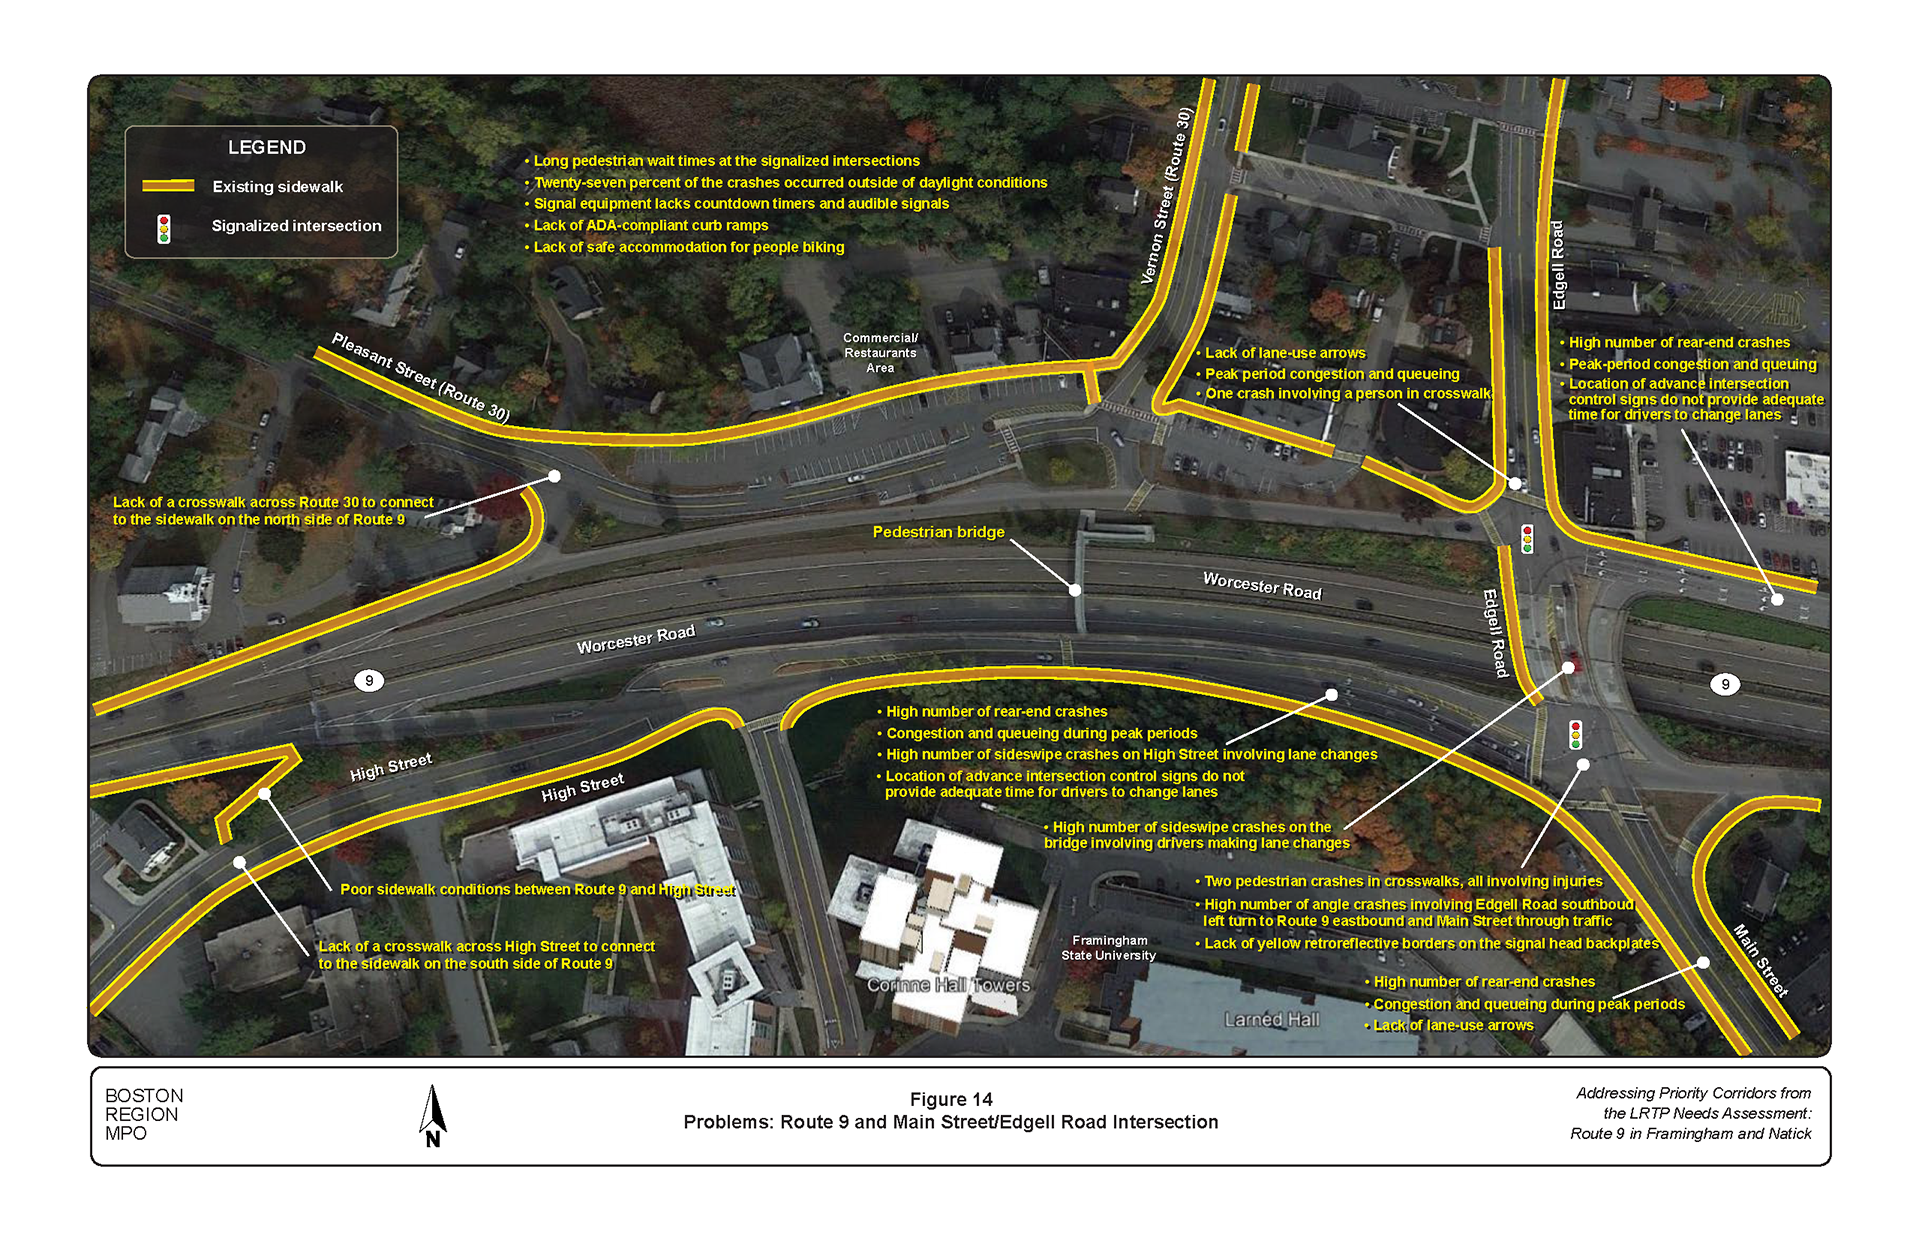 Figure 14 is an aerial photo showing the intersection of Route 9 and Main Street/Edgell Road and the problems